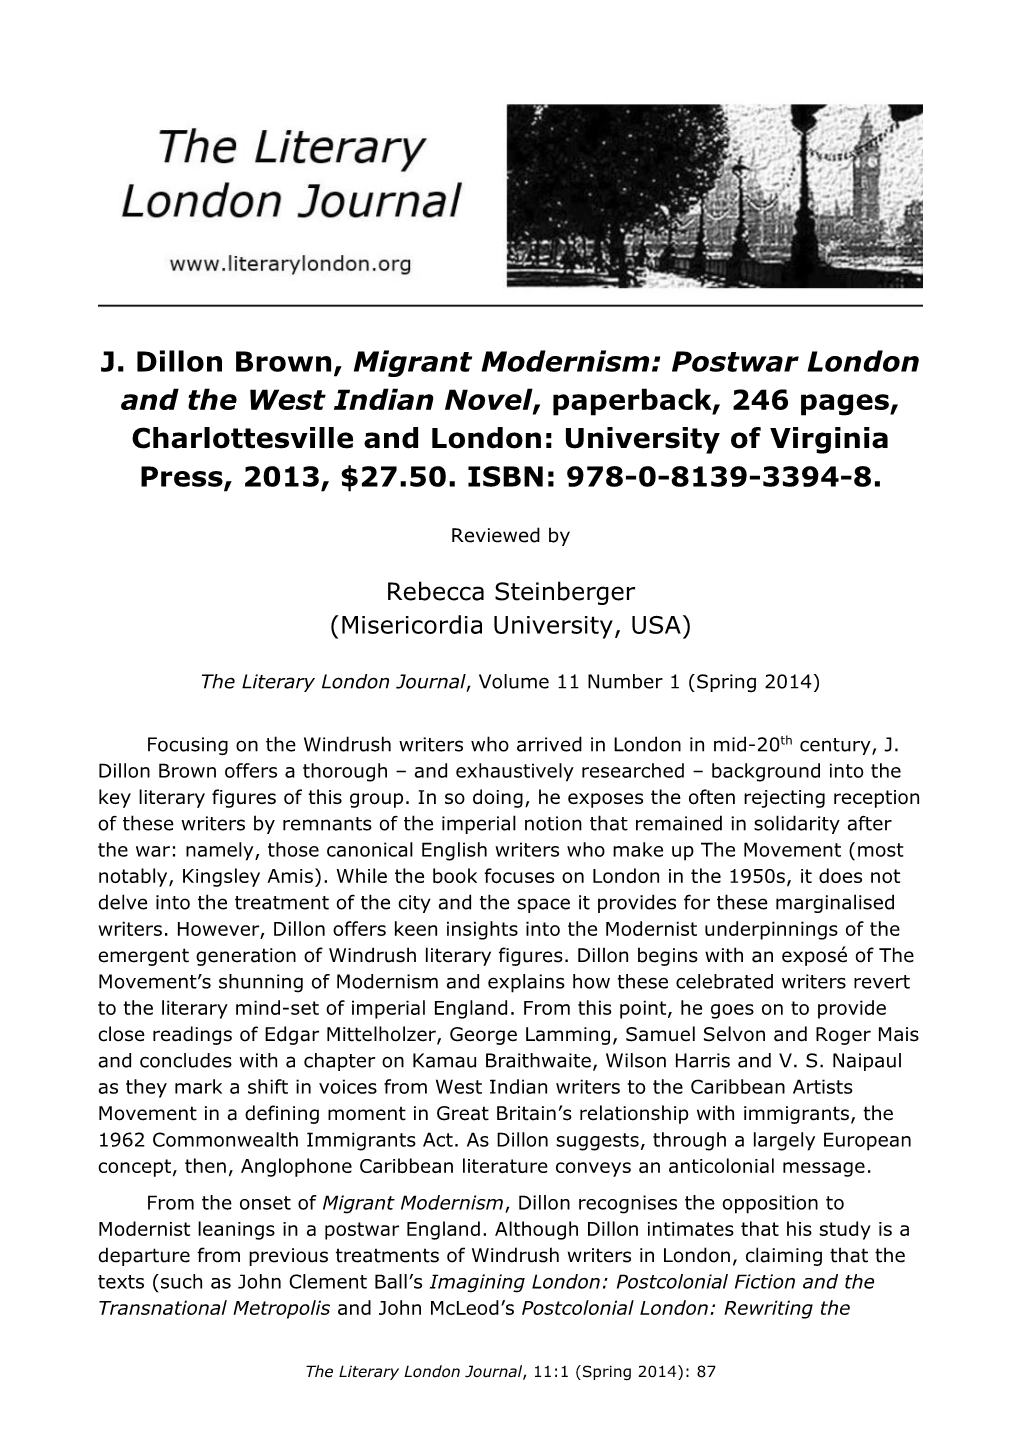 Postwar London and the West Indian Novel, Paperback, 246 Pages, Charlottesville and London: University of Virginia Press, 2013, $27.50